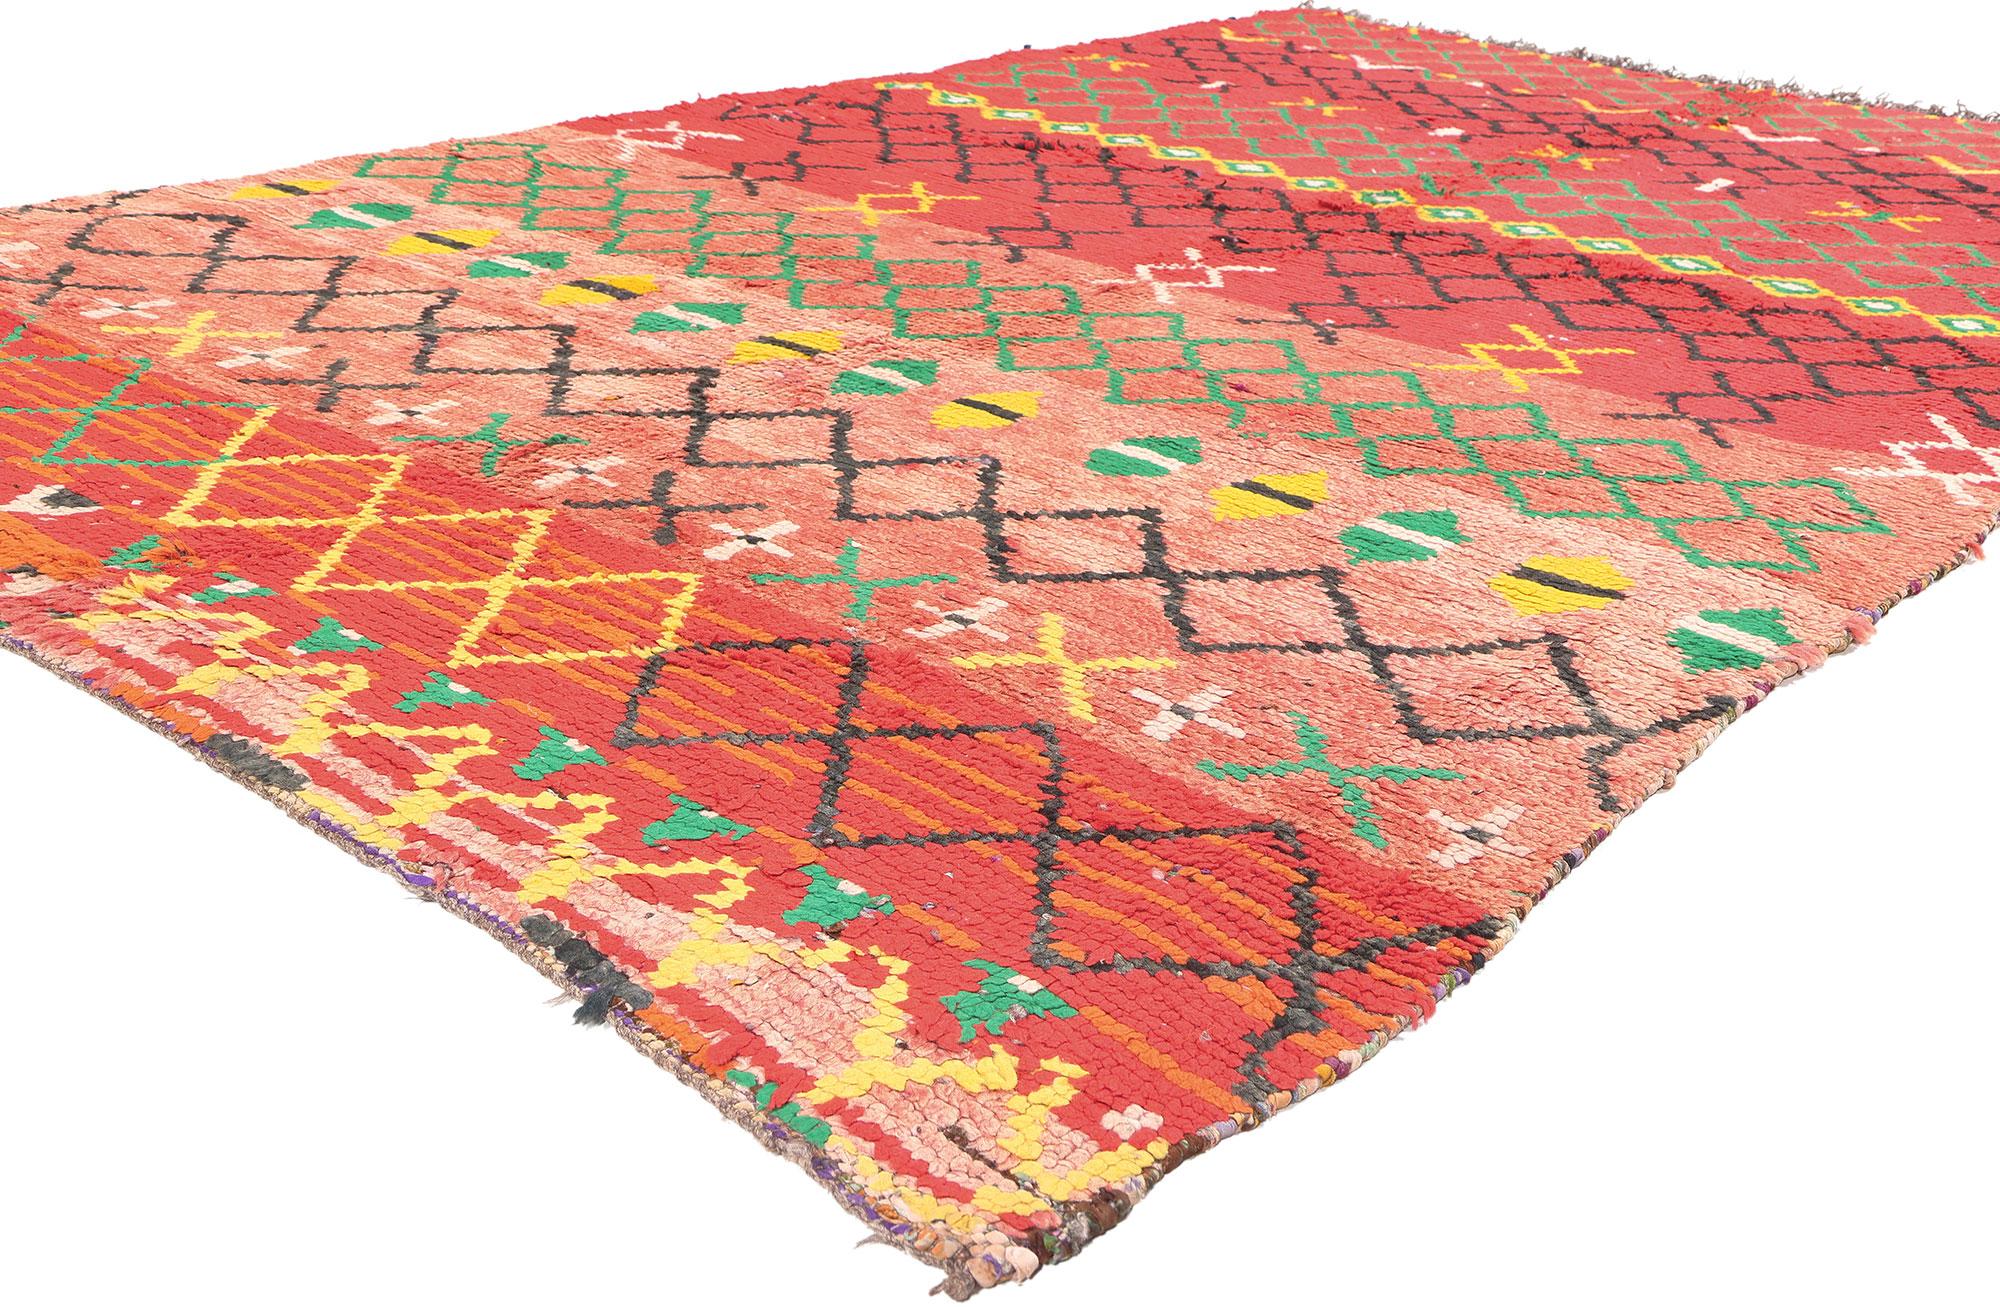 20296 Vintage Boucherouite Moroccan Rag Rug, 05'05 X 09'00. 
Embark on a nomadic journey entwined with tribal enchantment as you delve into the allure of this vintage Moroccan Boucherouite rag rug. Let its fiery shade of red serve as the canvas for